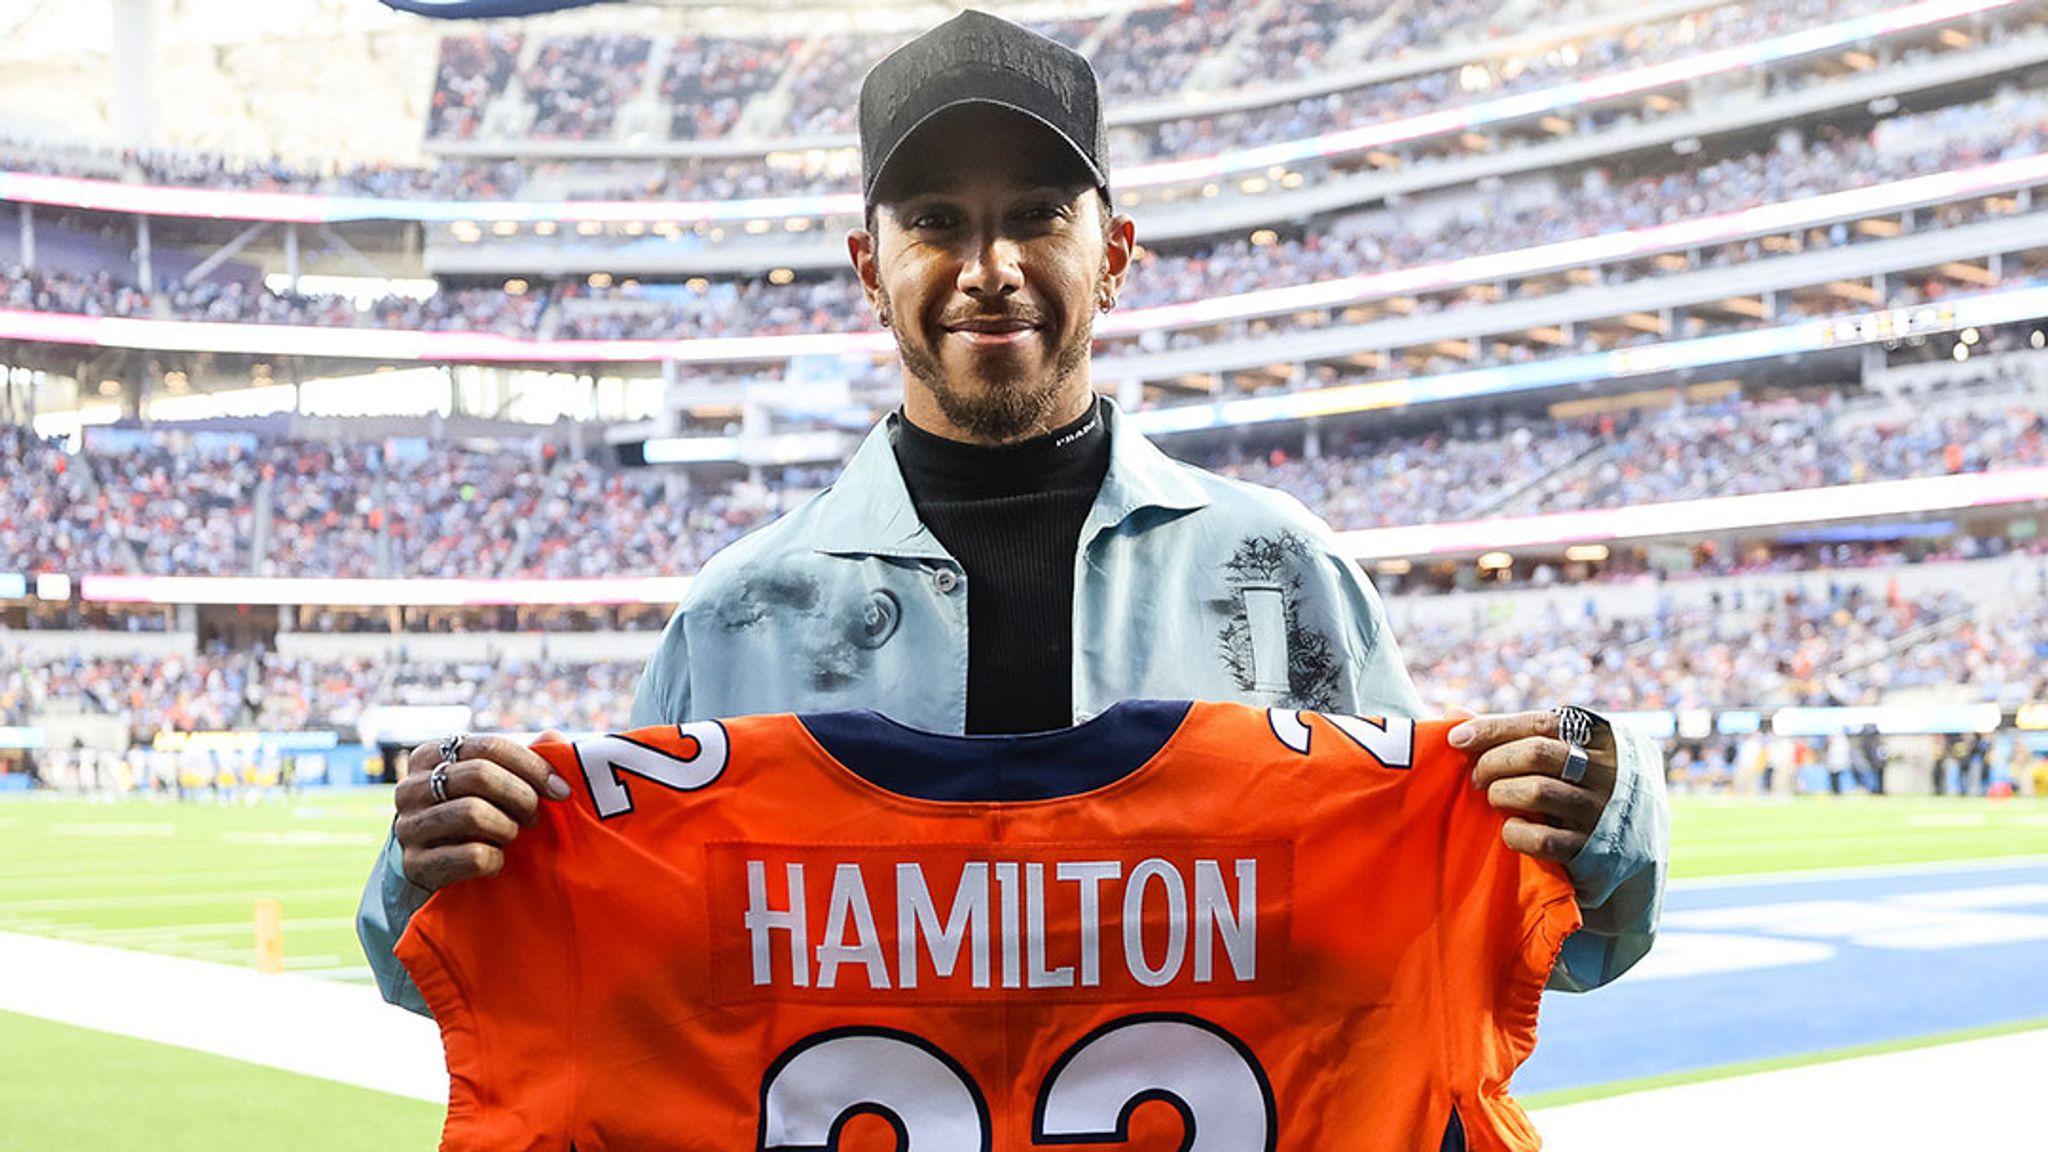 Denver Broncos: Sir Lewis Hamilton says he 'jumped at chance' to part-own  NFL team | NFL News | Sky Sports